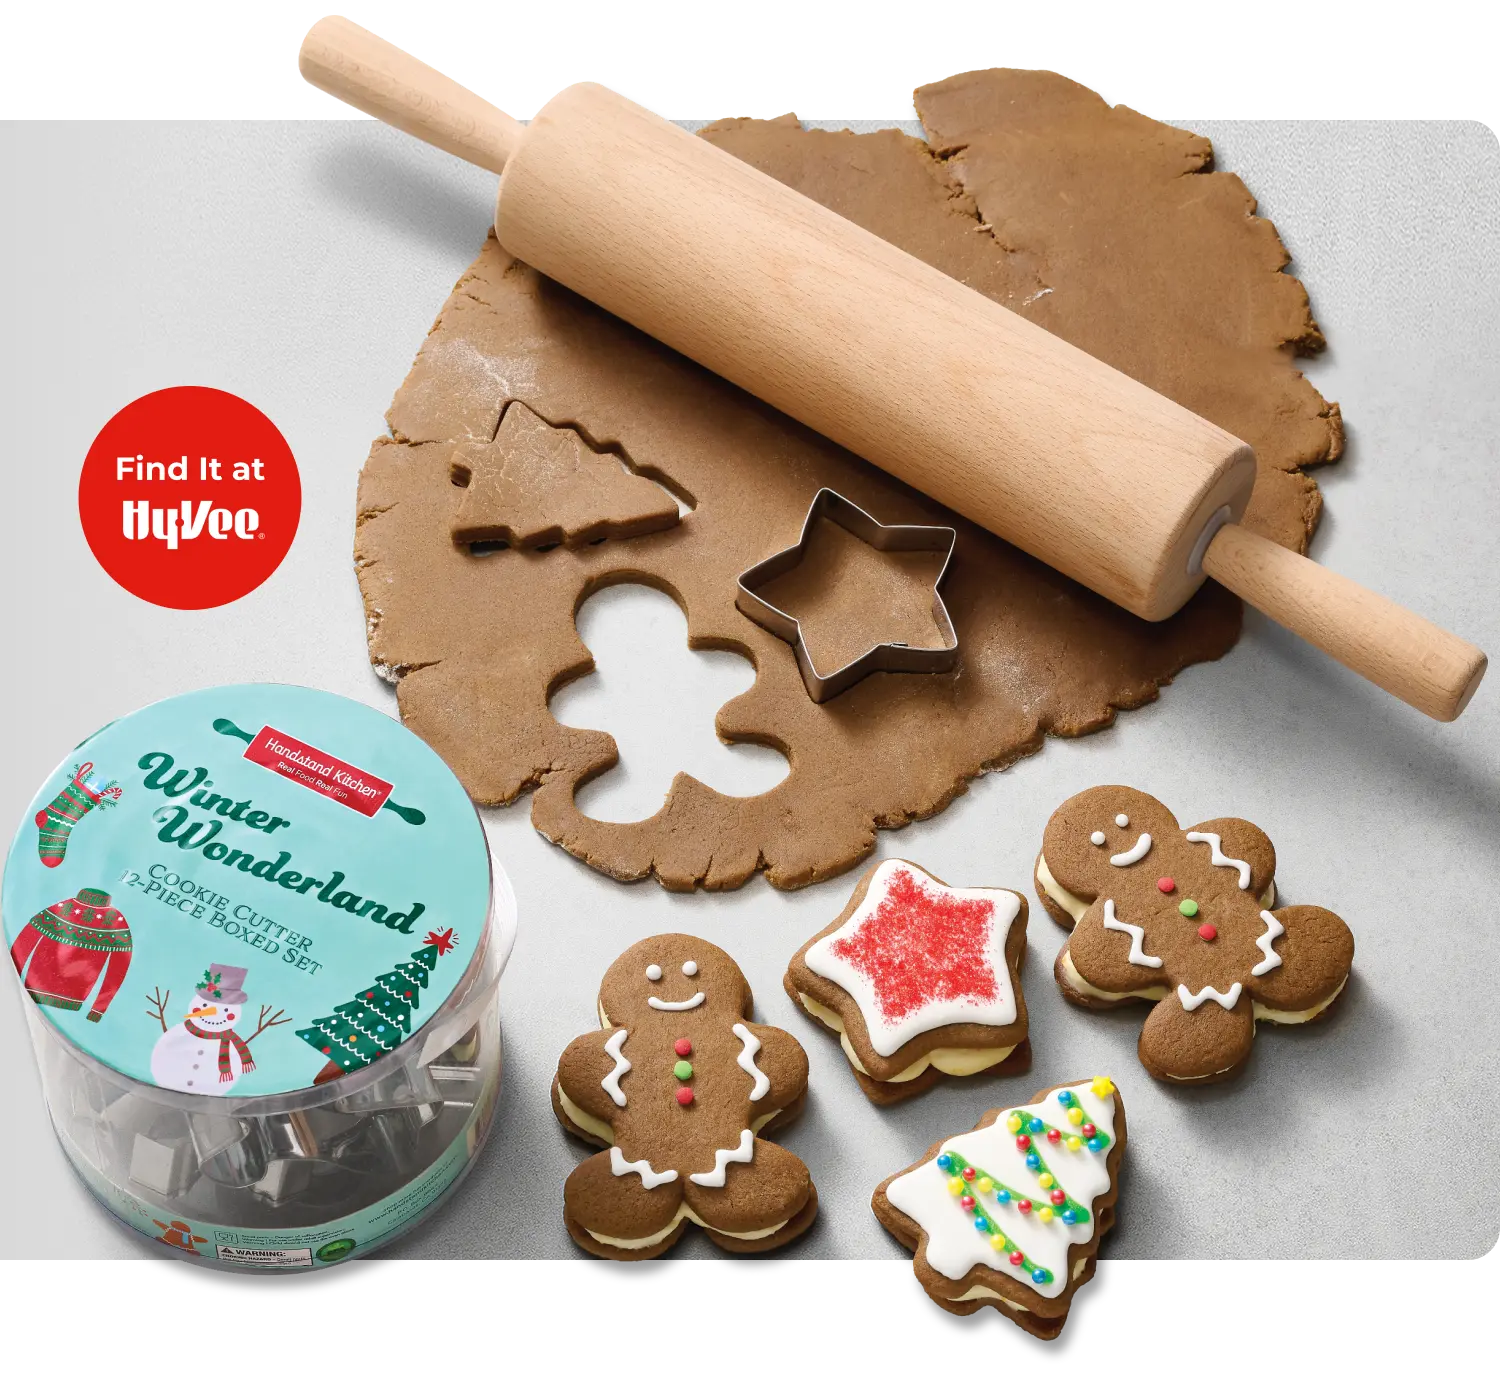 Winter Wonderland Cookie Baking Kit by The Cookie Cups